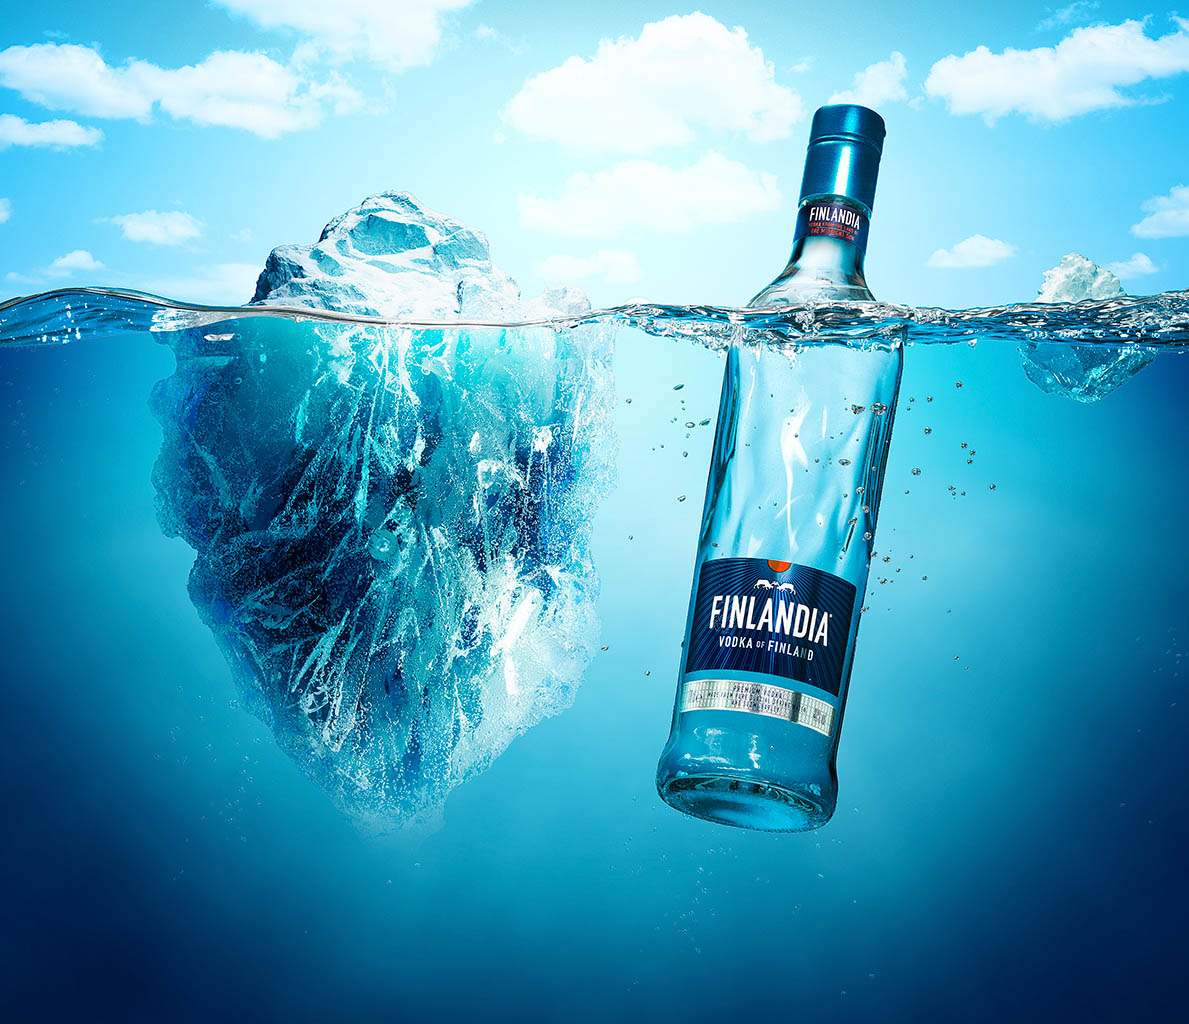 Creative Still Life Product Photography and Retouching of Finlandia vodka bottle by Packshot Factory